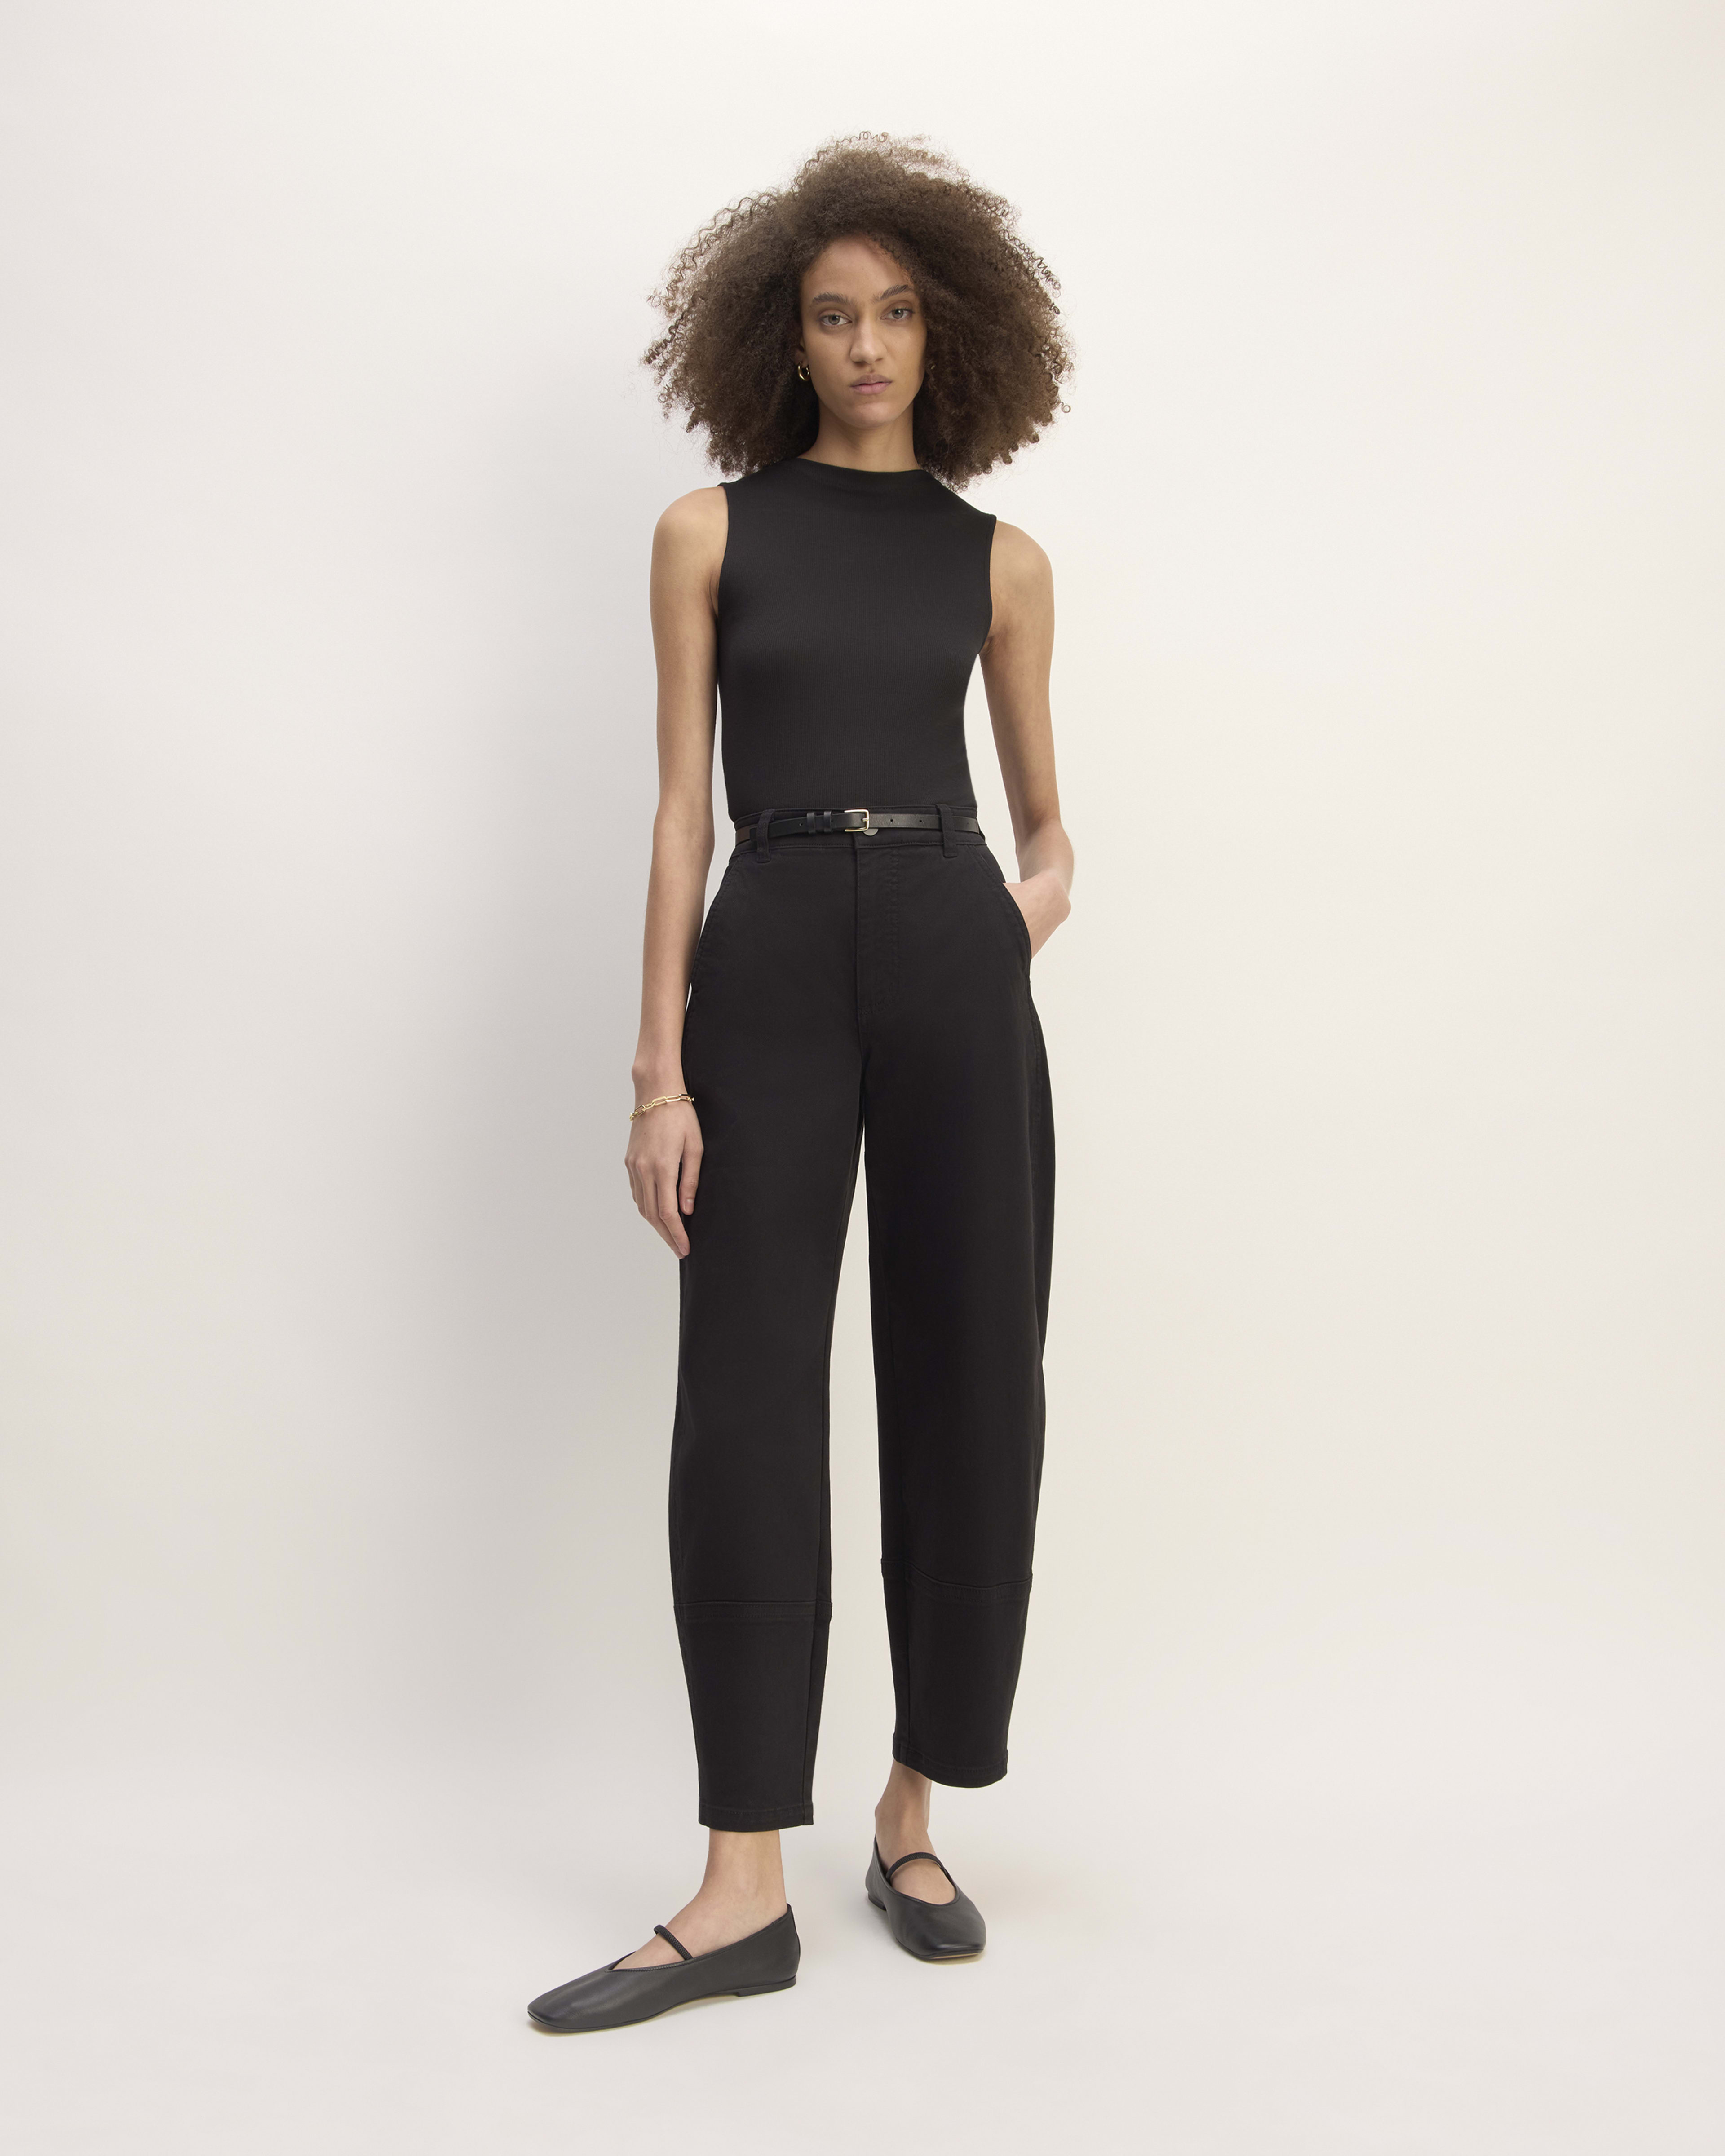 Everlane Straight Leg Crop Pant, Straight Leg Pant & Utility Barrel Pant  Review: How they compare – PhD in Clothes